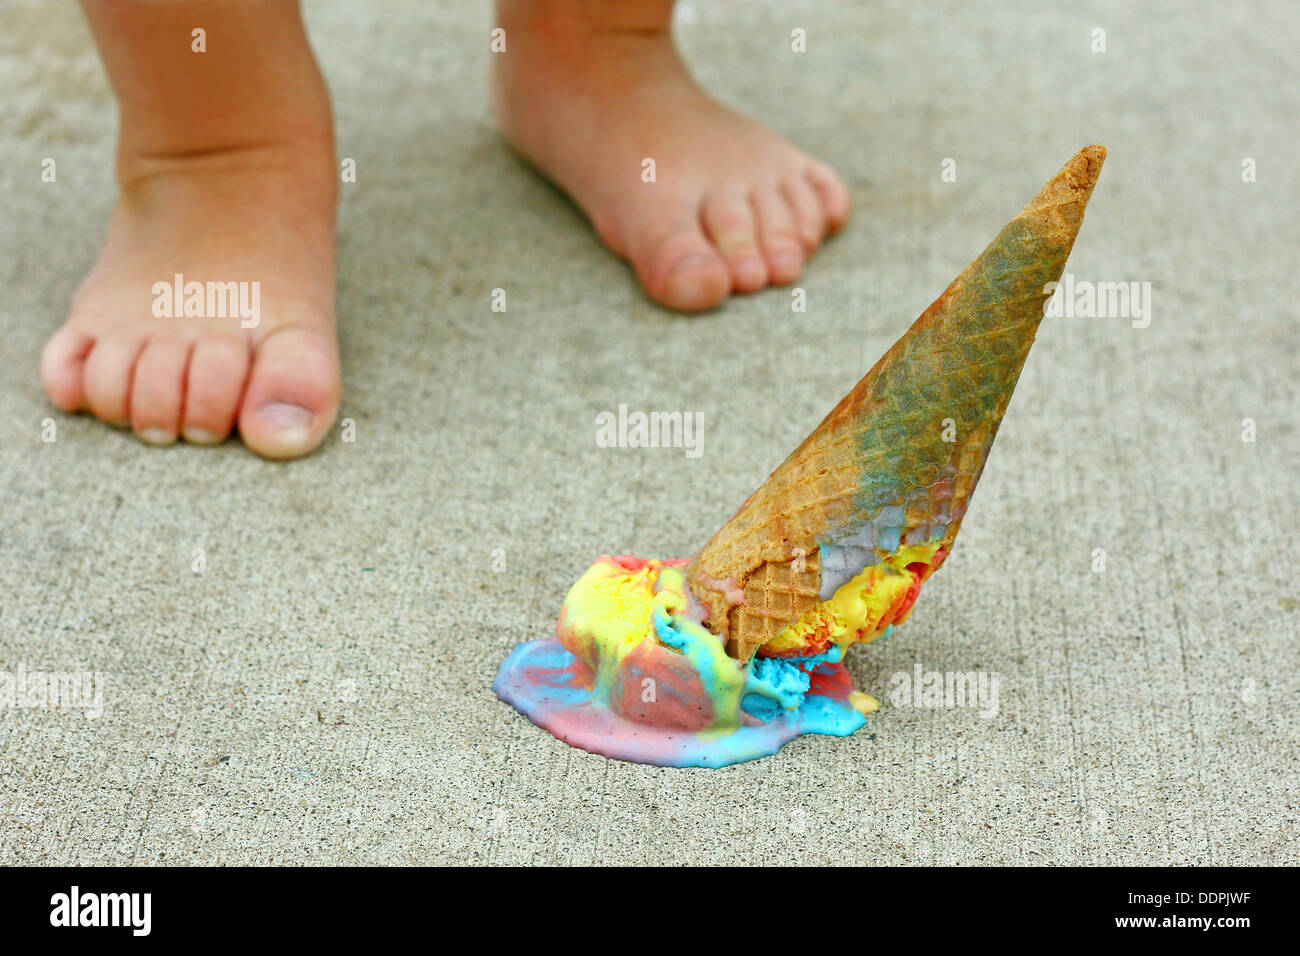 a dropped rainbow colored ice cream cone lays upside down on the sidewalk at the feet of a young child Stock Photo